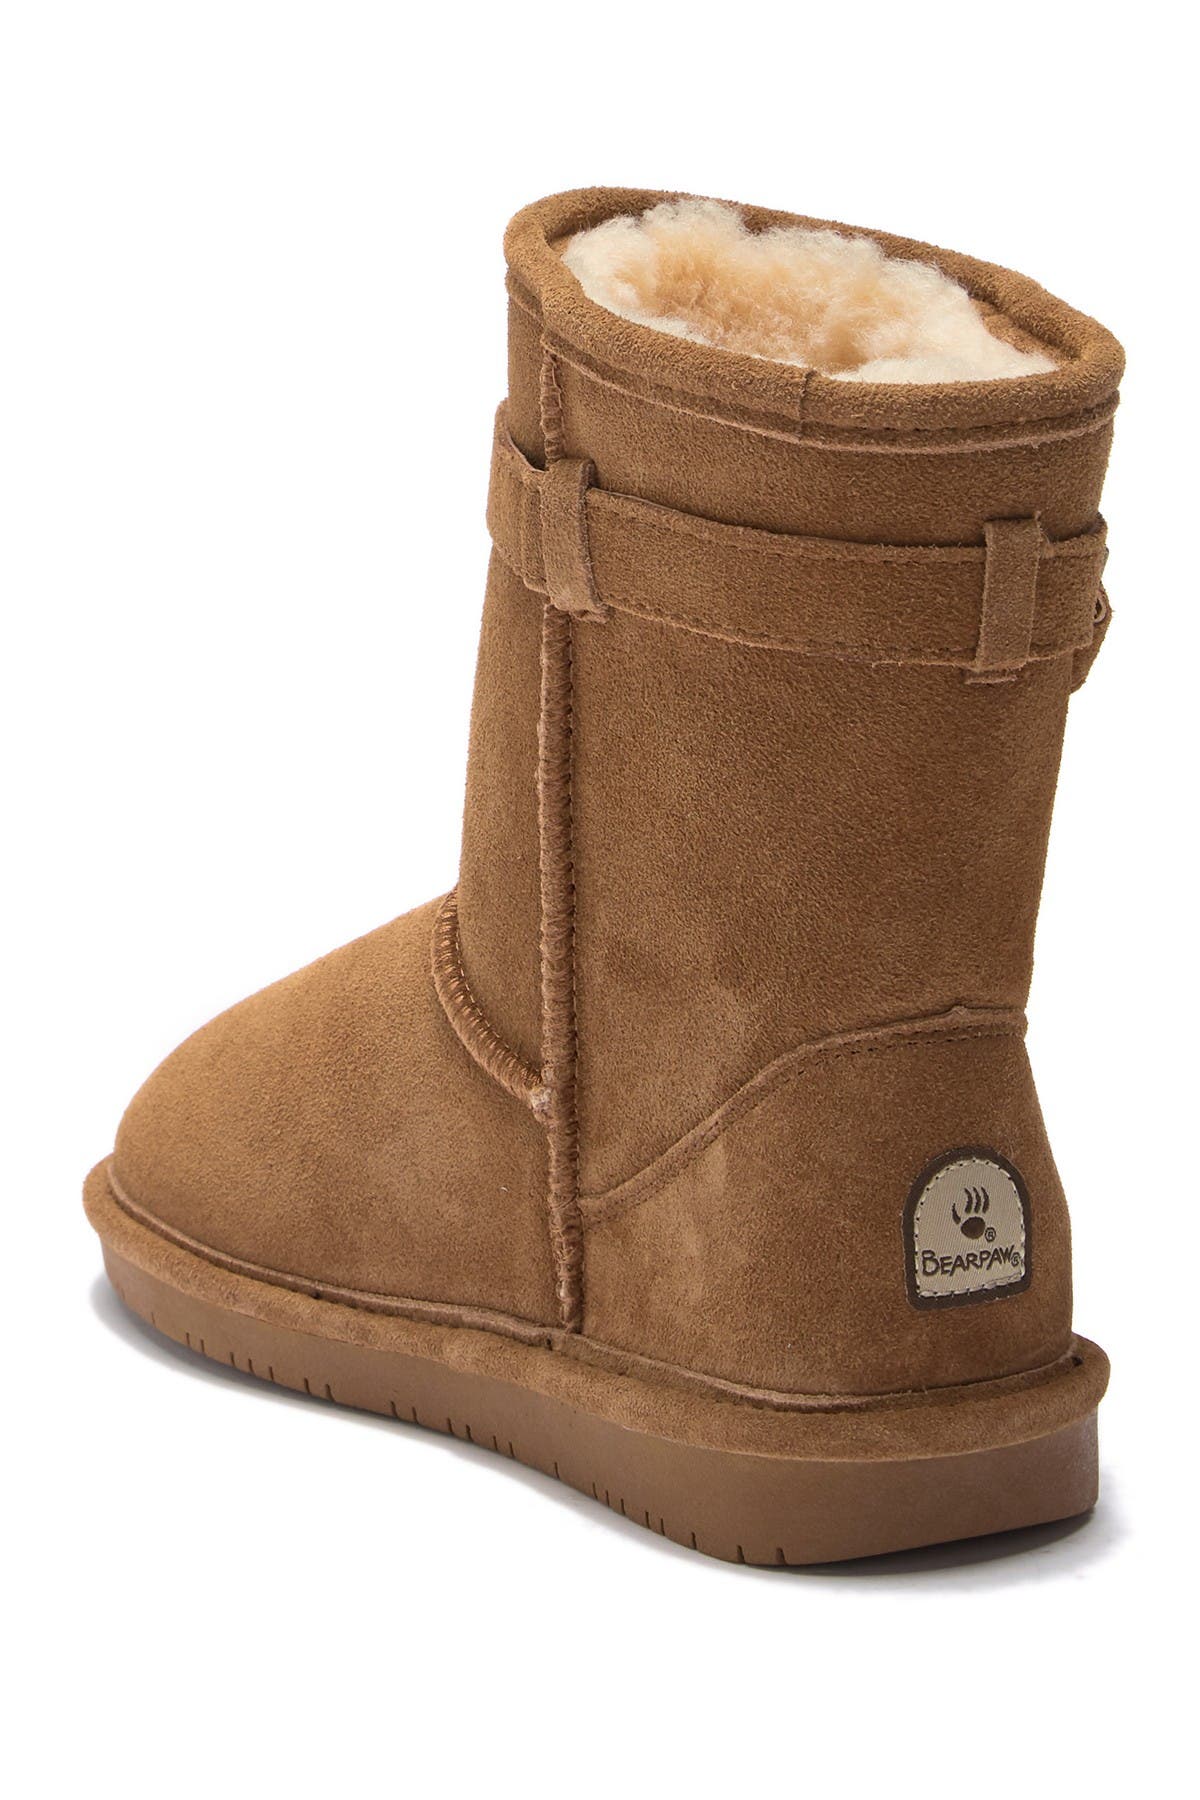 stores that sell bearpaw boots